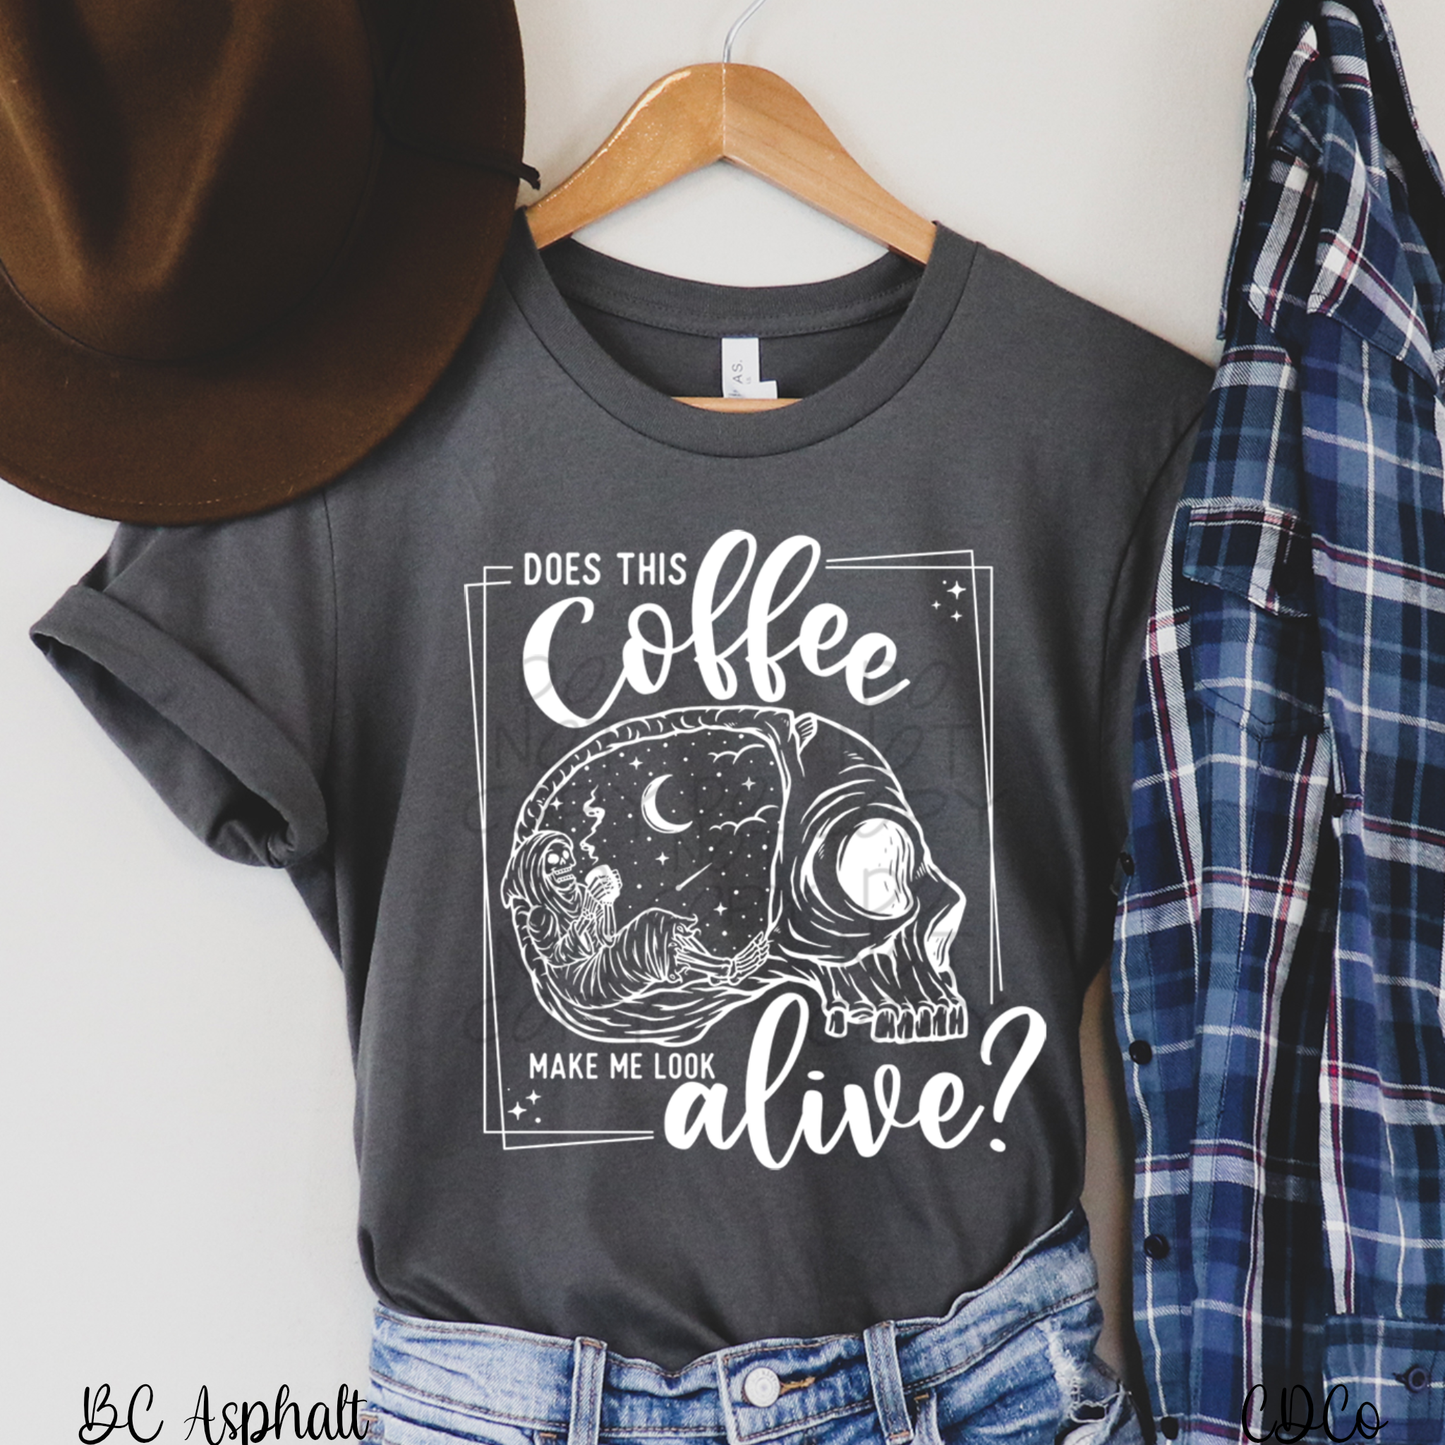 Does This Coffee Make Me Look Alive?  (325°)